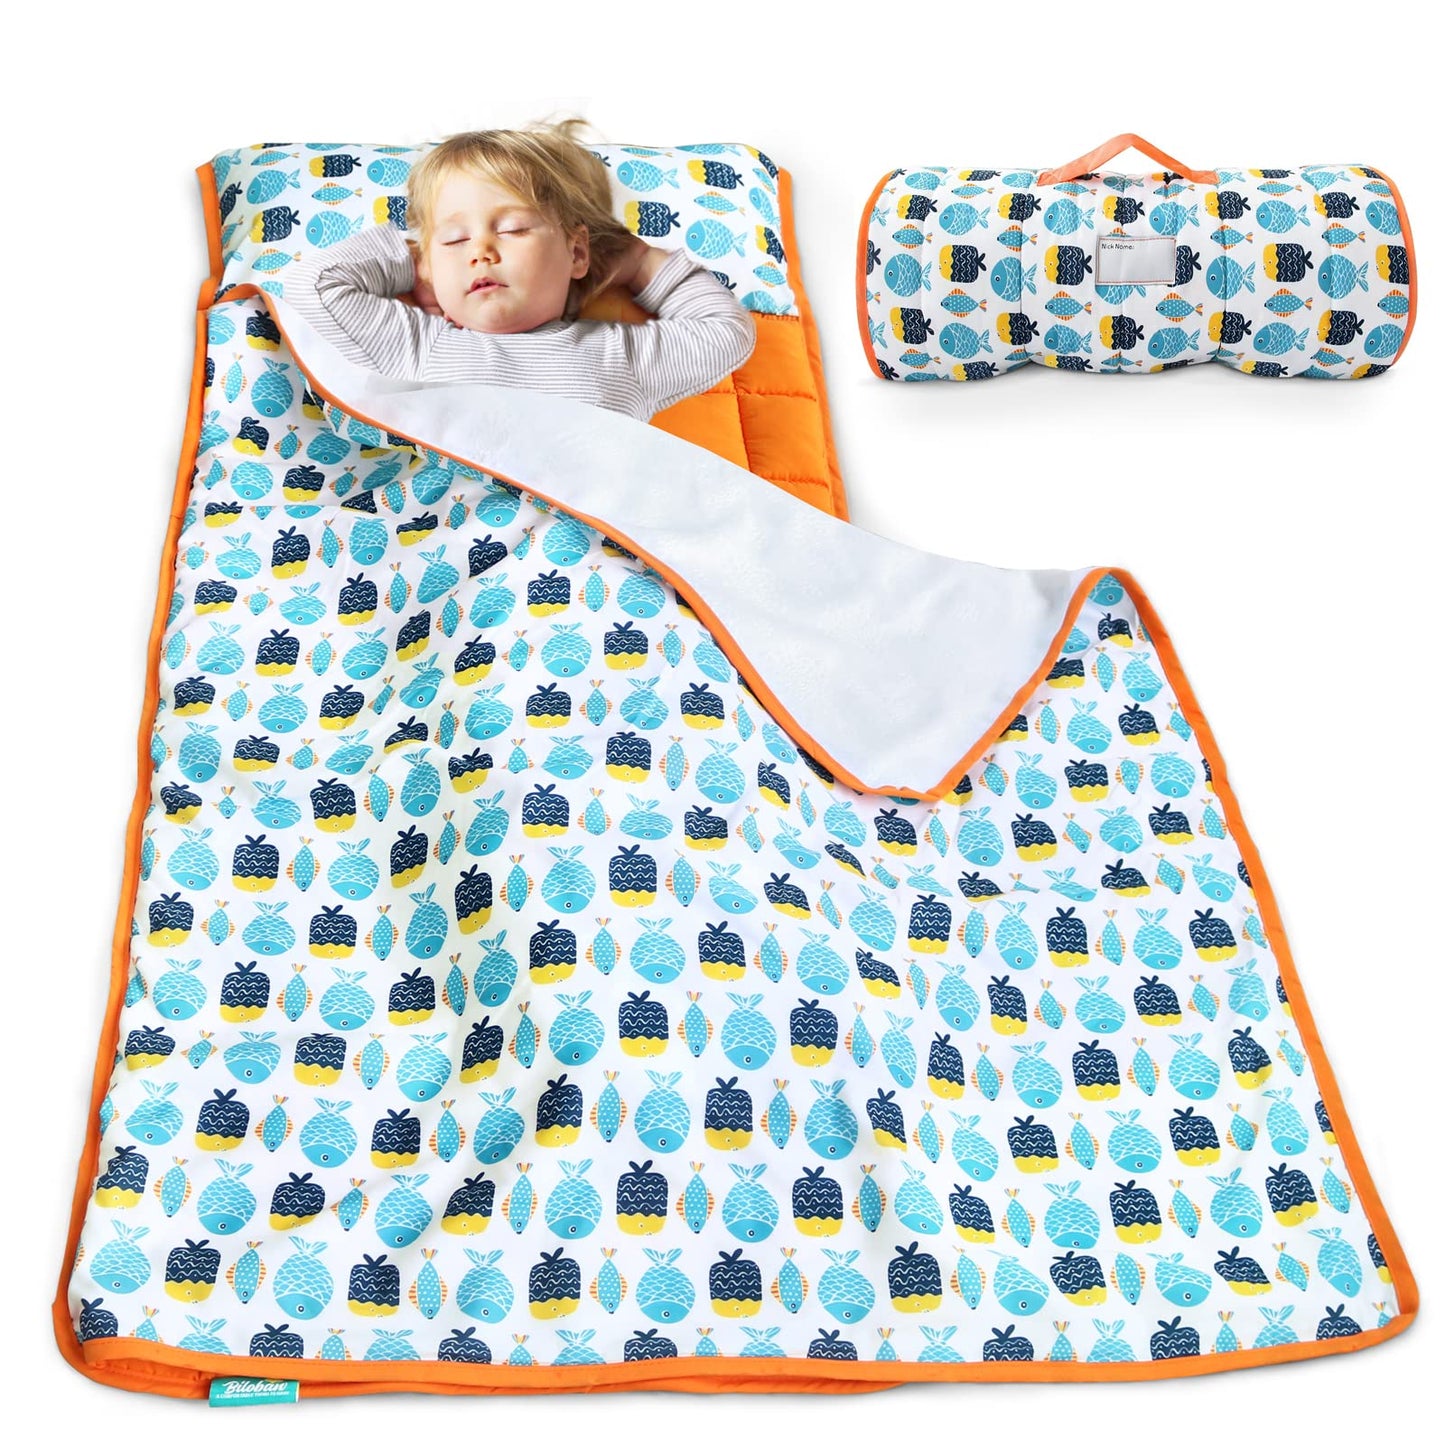 Toddler Nap Mat with Pillow and Fleece Blanket, Super Soft & Warm Kids Nap Mats for Preschool Daycare, Portable Travel Sleeping Bag for Toddlers (Quilted Improved Thickness)